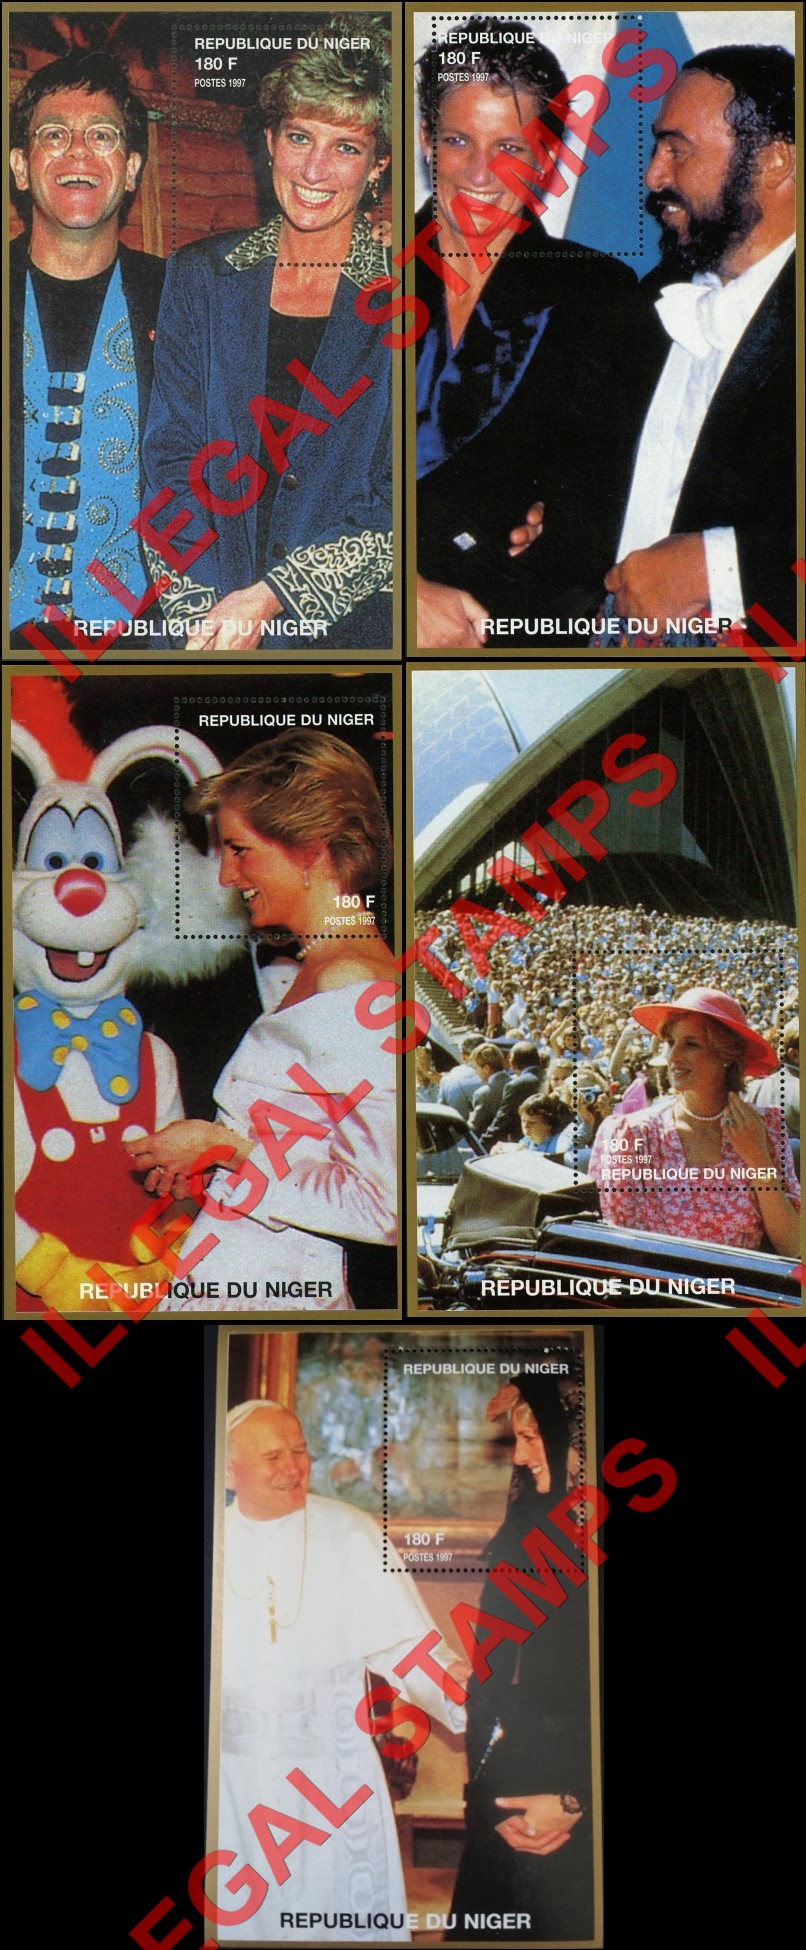 Niger 1997 Princess Diana Performing Humanitarian Deeds, on World Tours and with Various Important People Souvenir Sheets of 1 (Part 2)